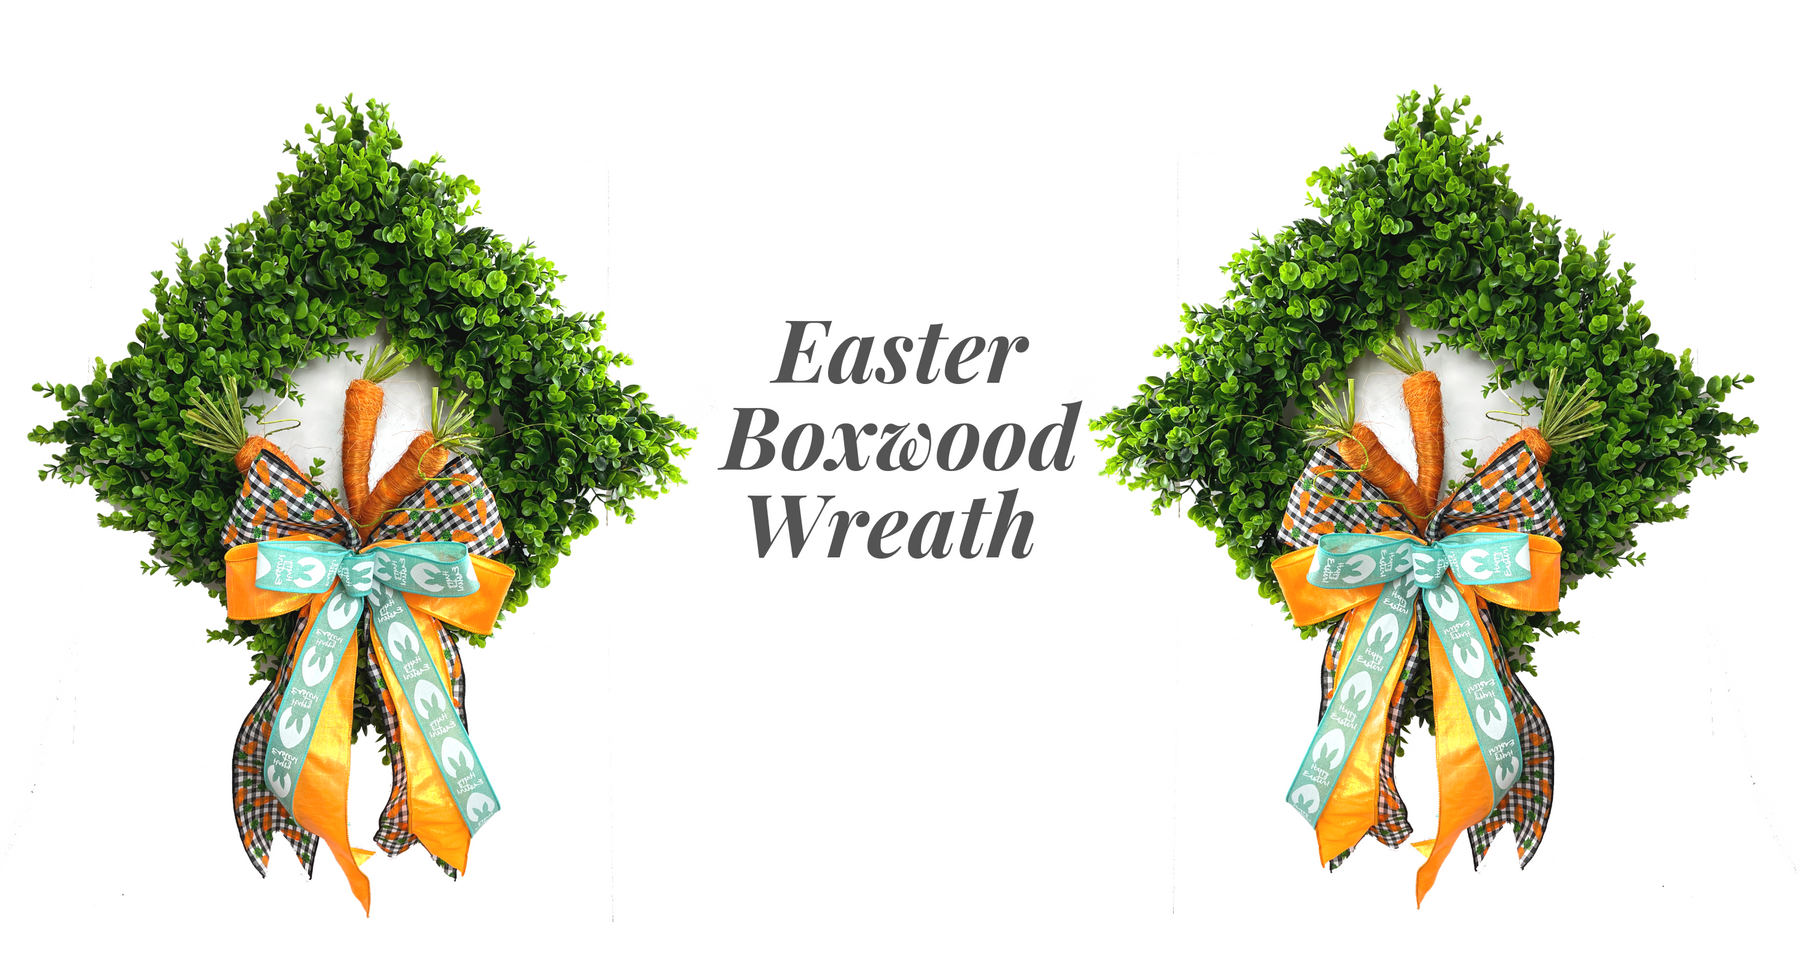 Decorate a Boxwood Wreath for Easter